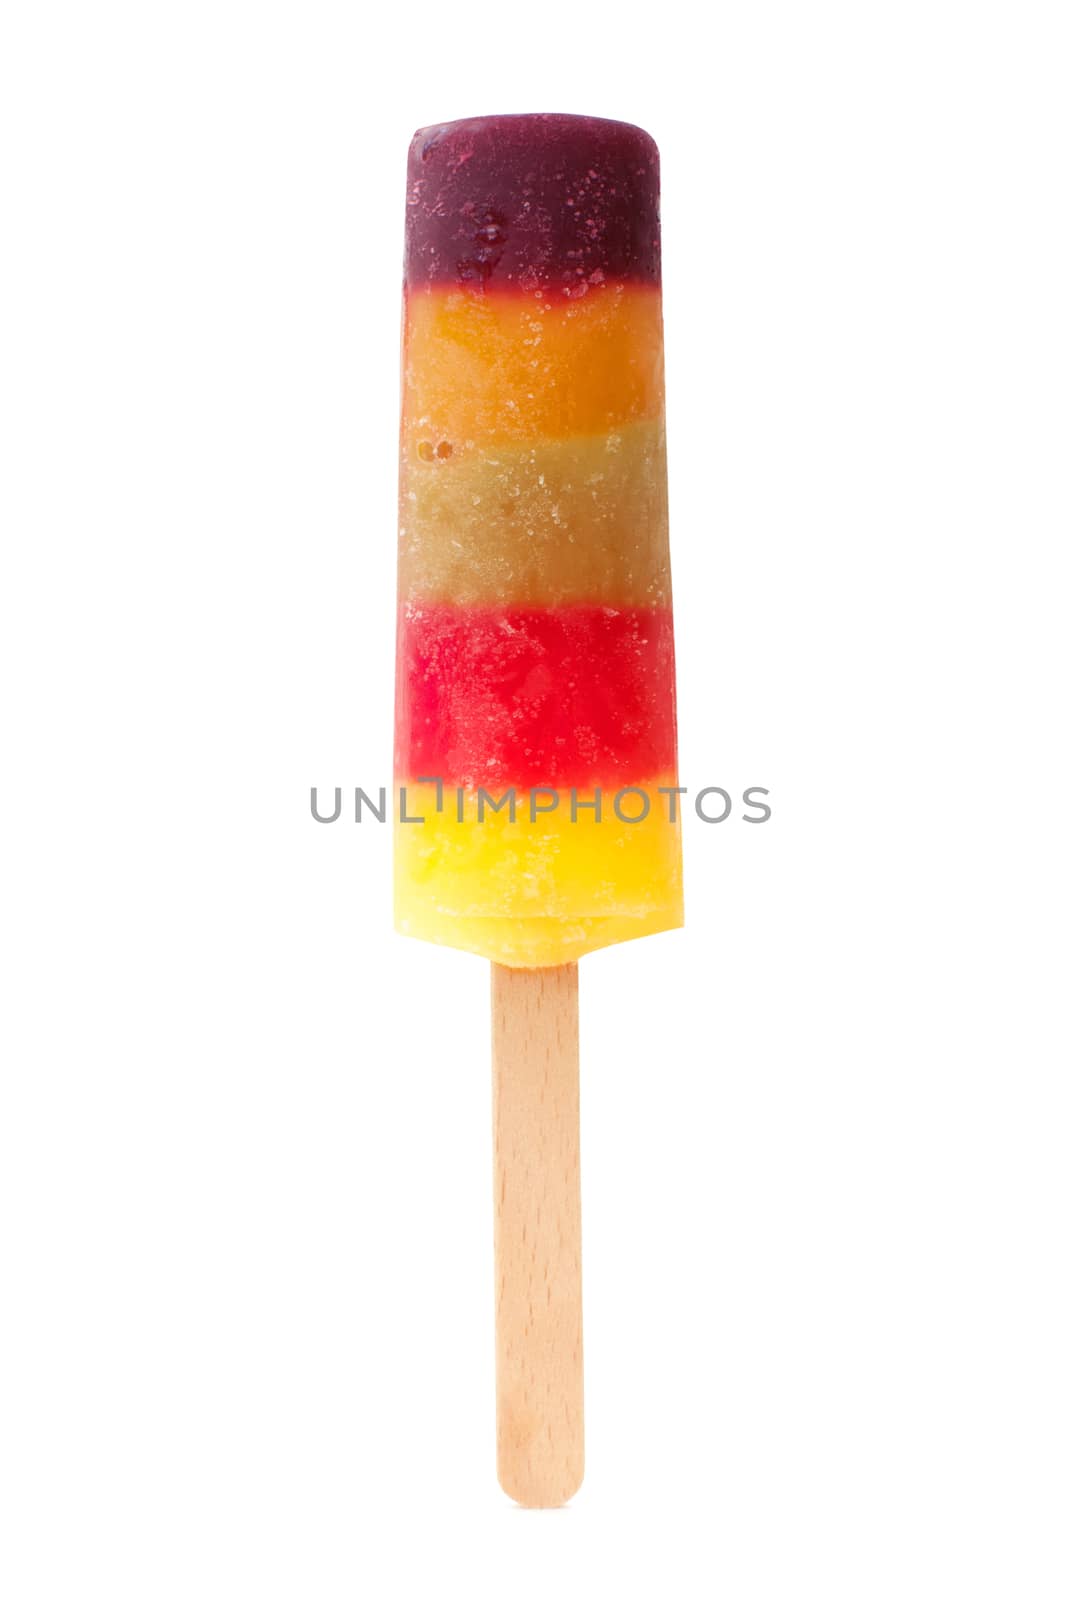 Ice lolly popsicle by unikpix